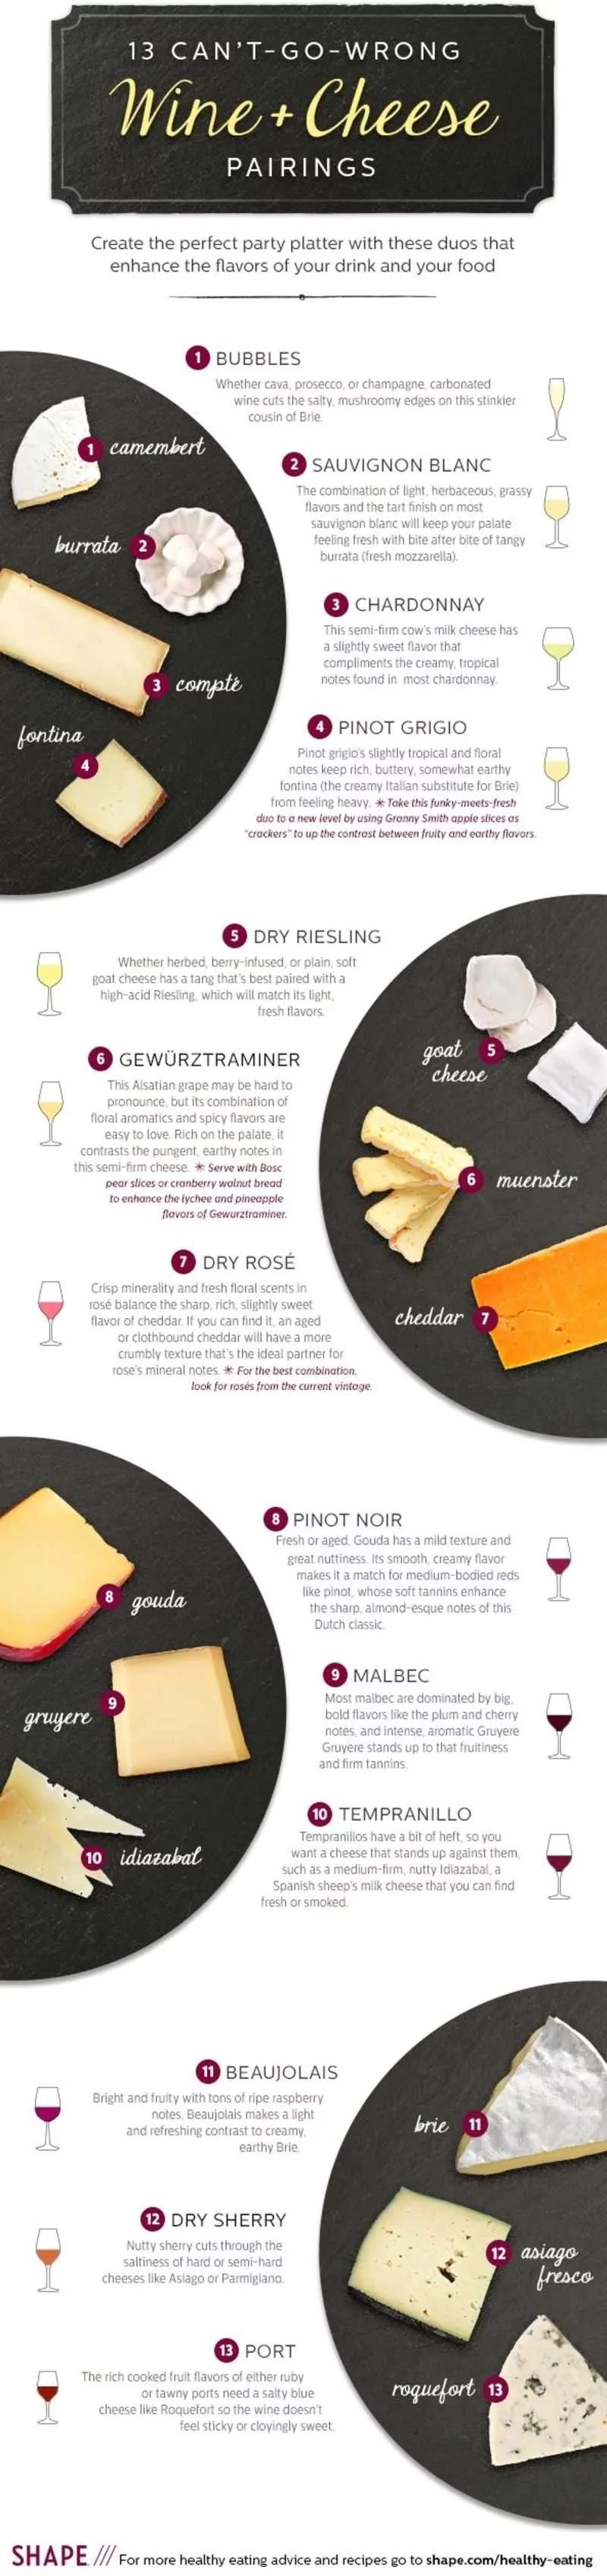 13 Can't-Go-Wrong Wine and Cheese Pairings